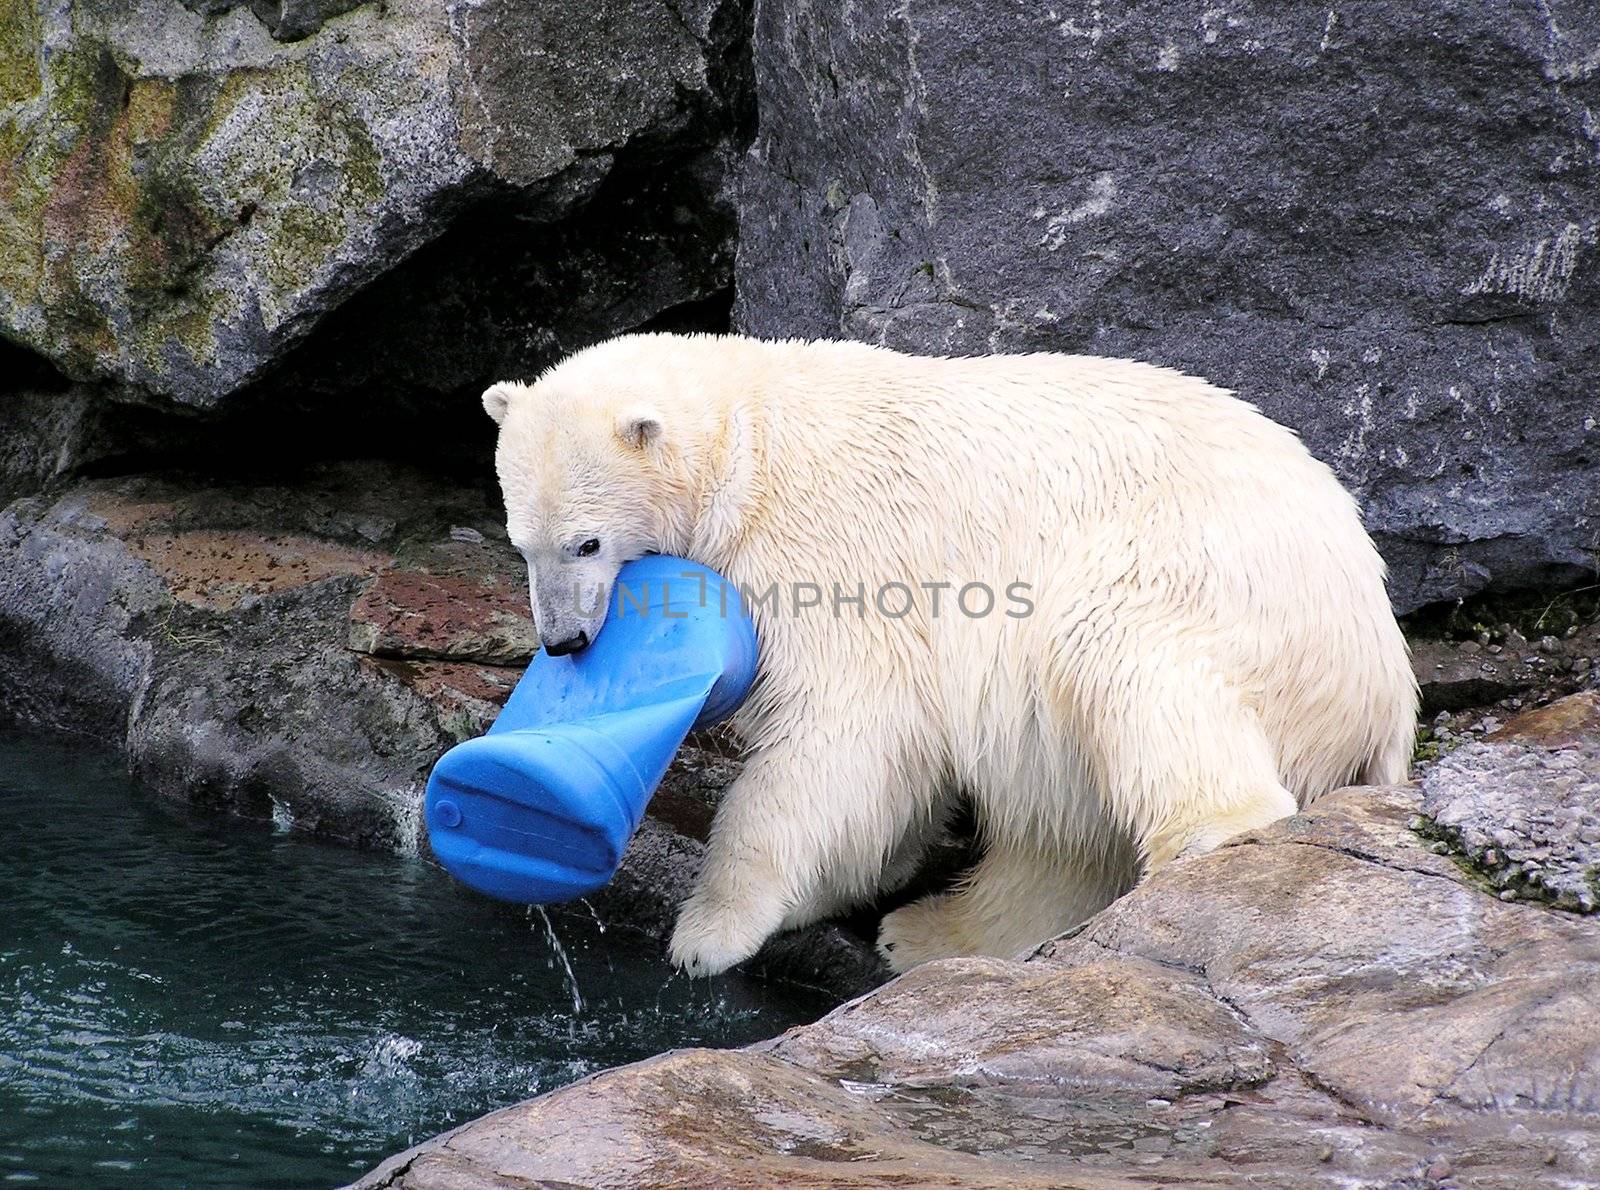 Polar bear playing with toy by Mirage3